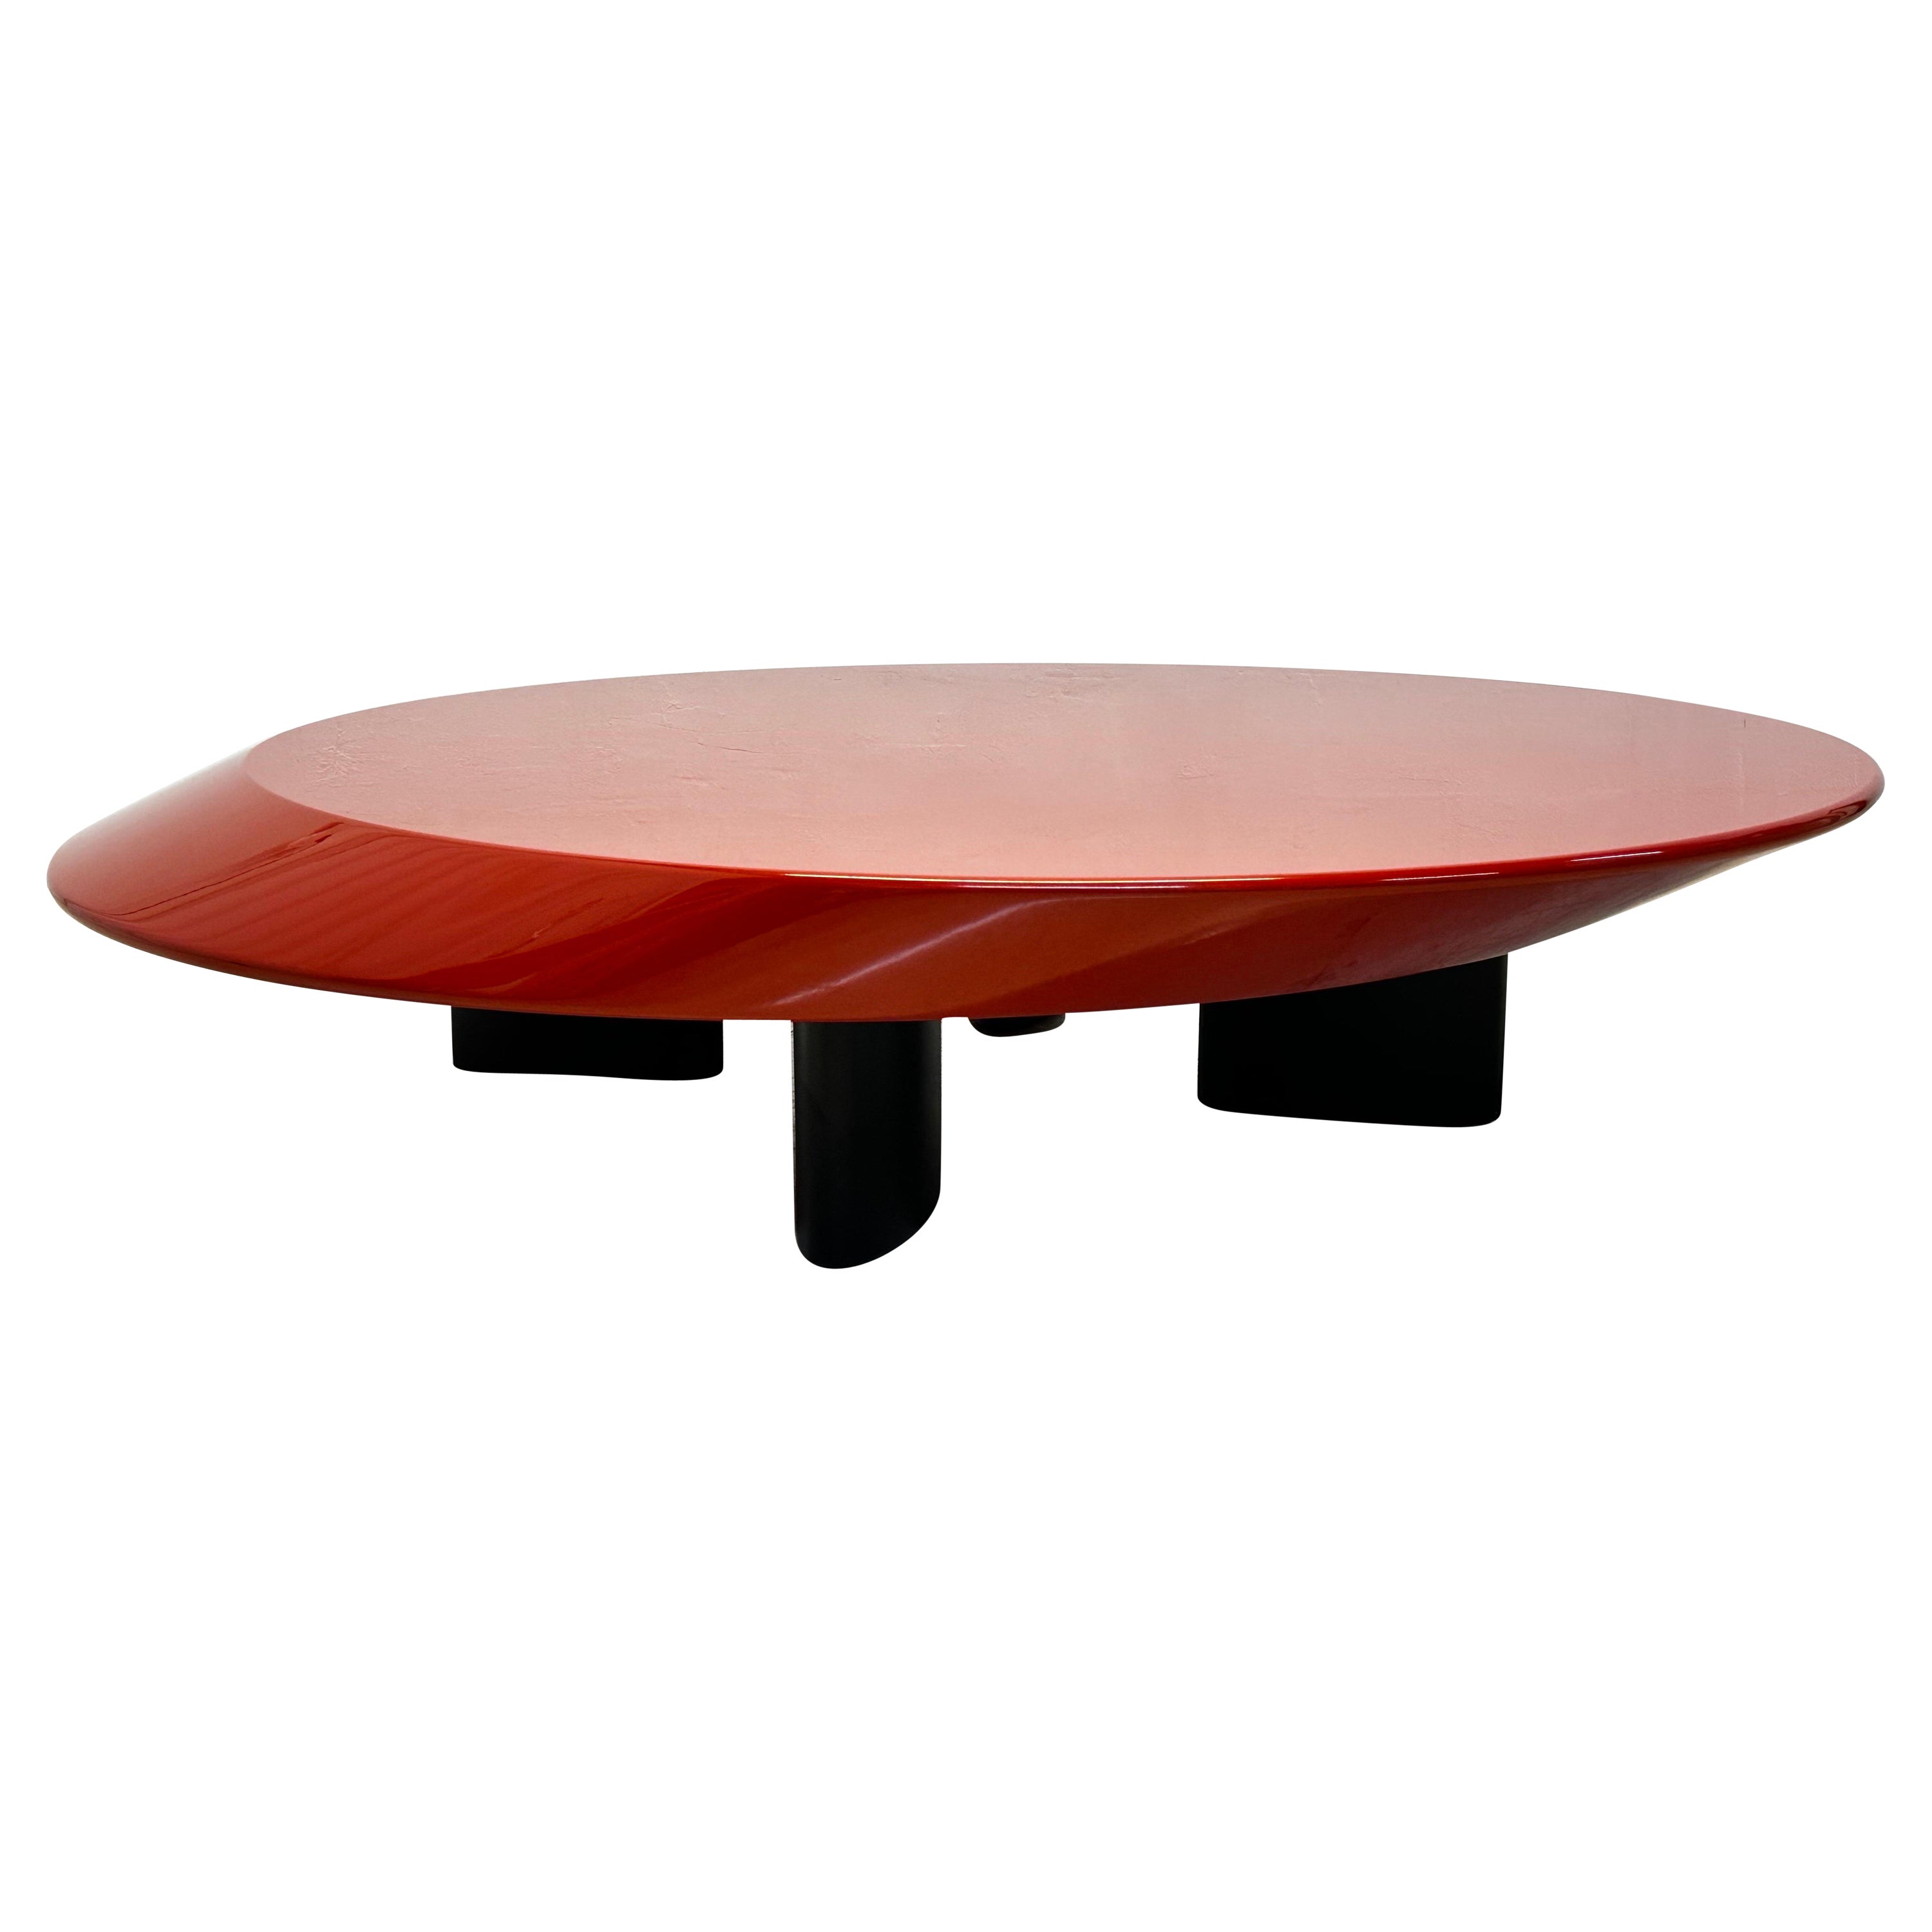 Charlotte Perriand "Accordo" Coffee Table for Cassina For Sale